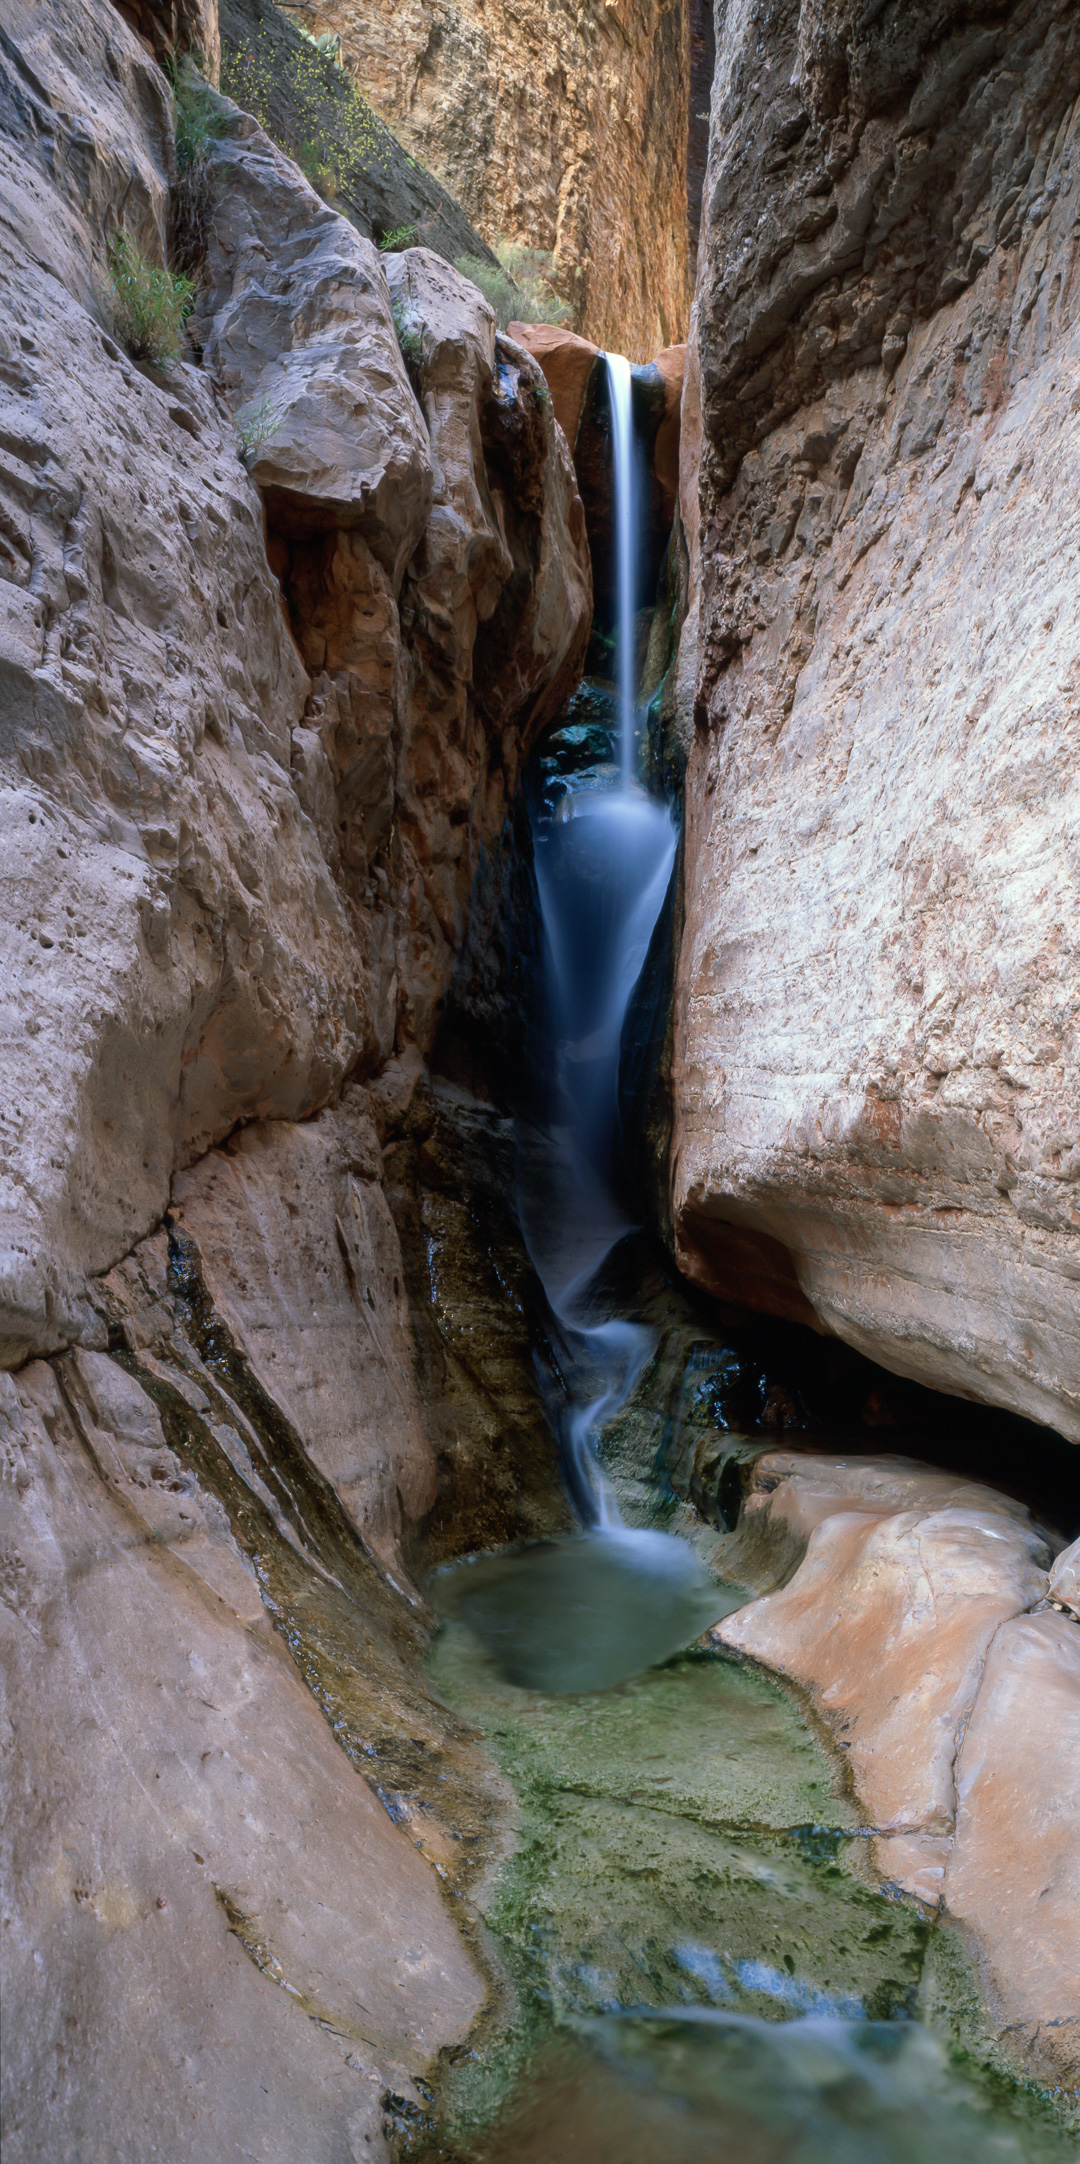  Waterfall near the mouth of Scotty's Hollow. Velvia 50, 3sec, f/16. 